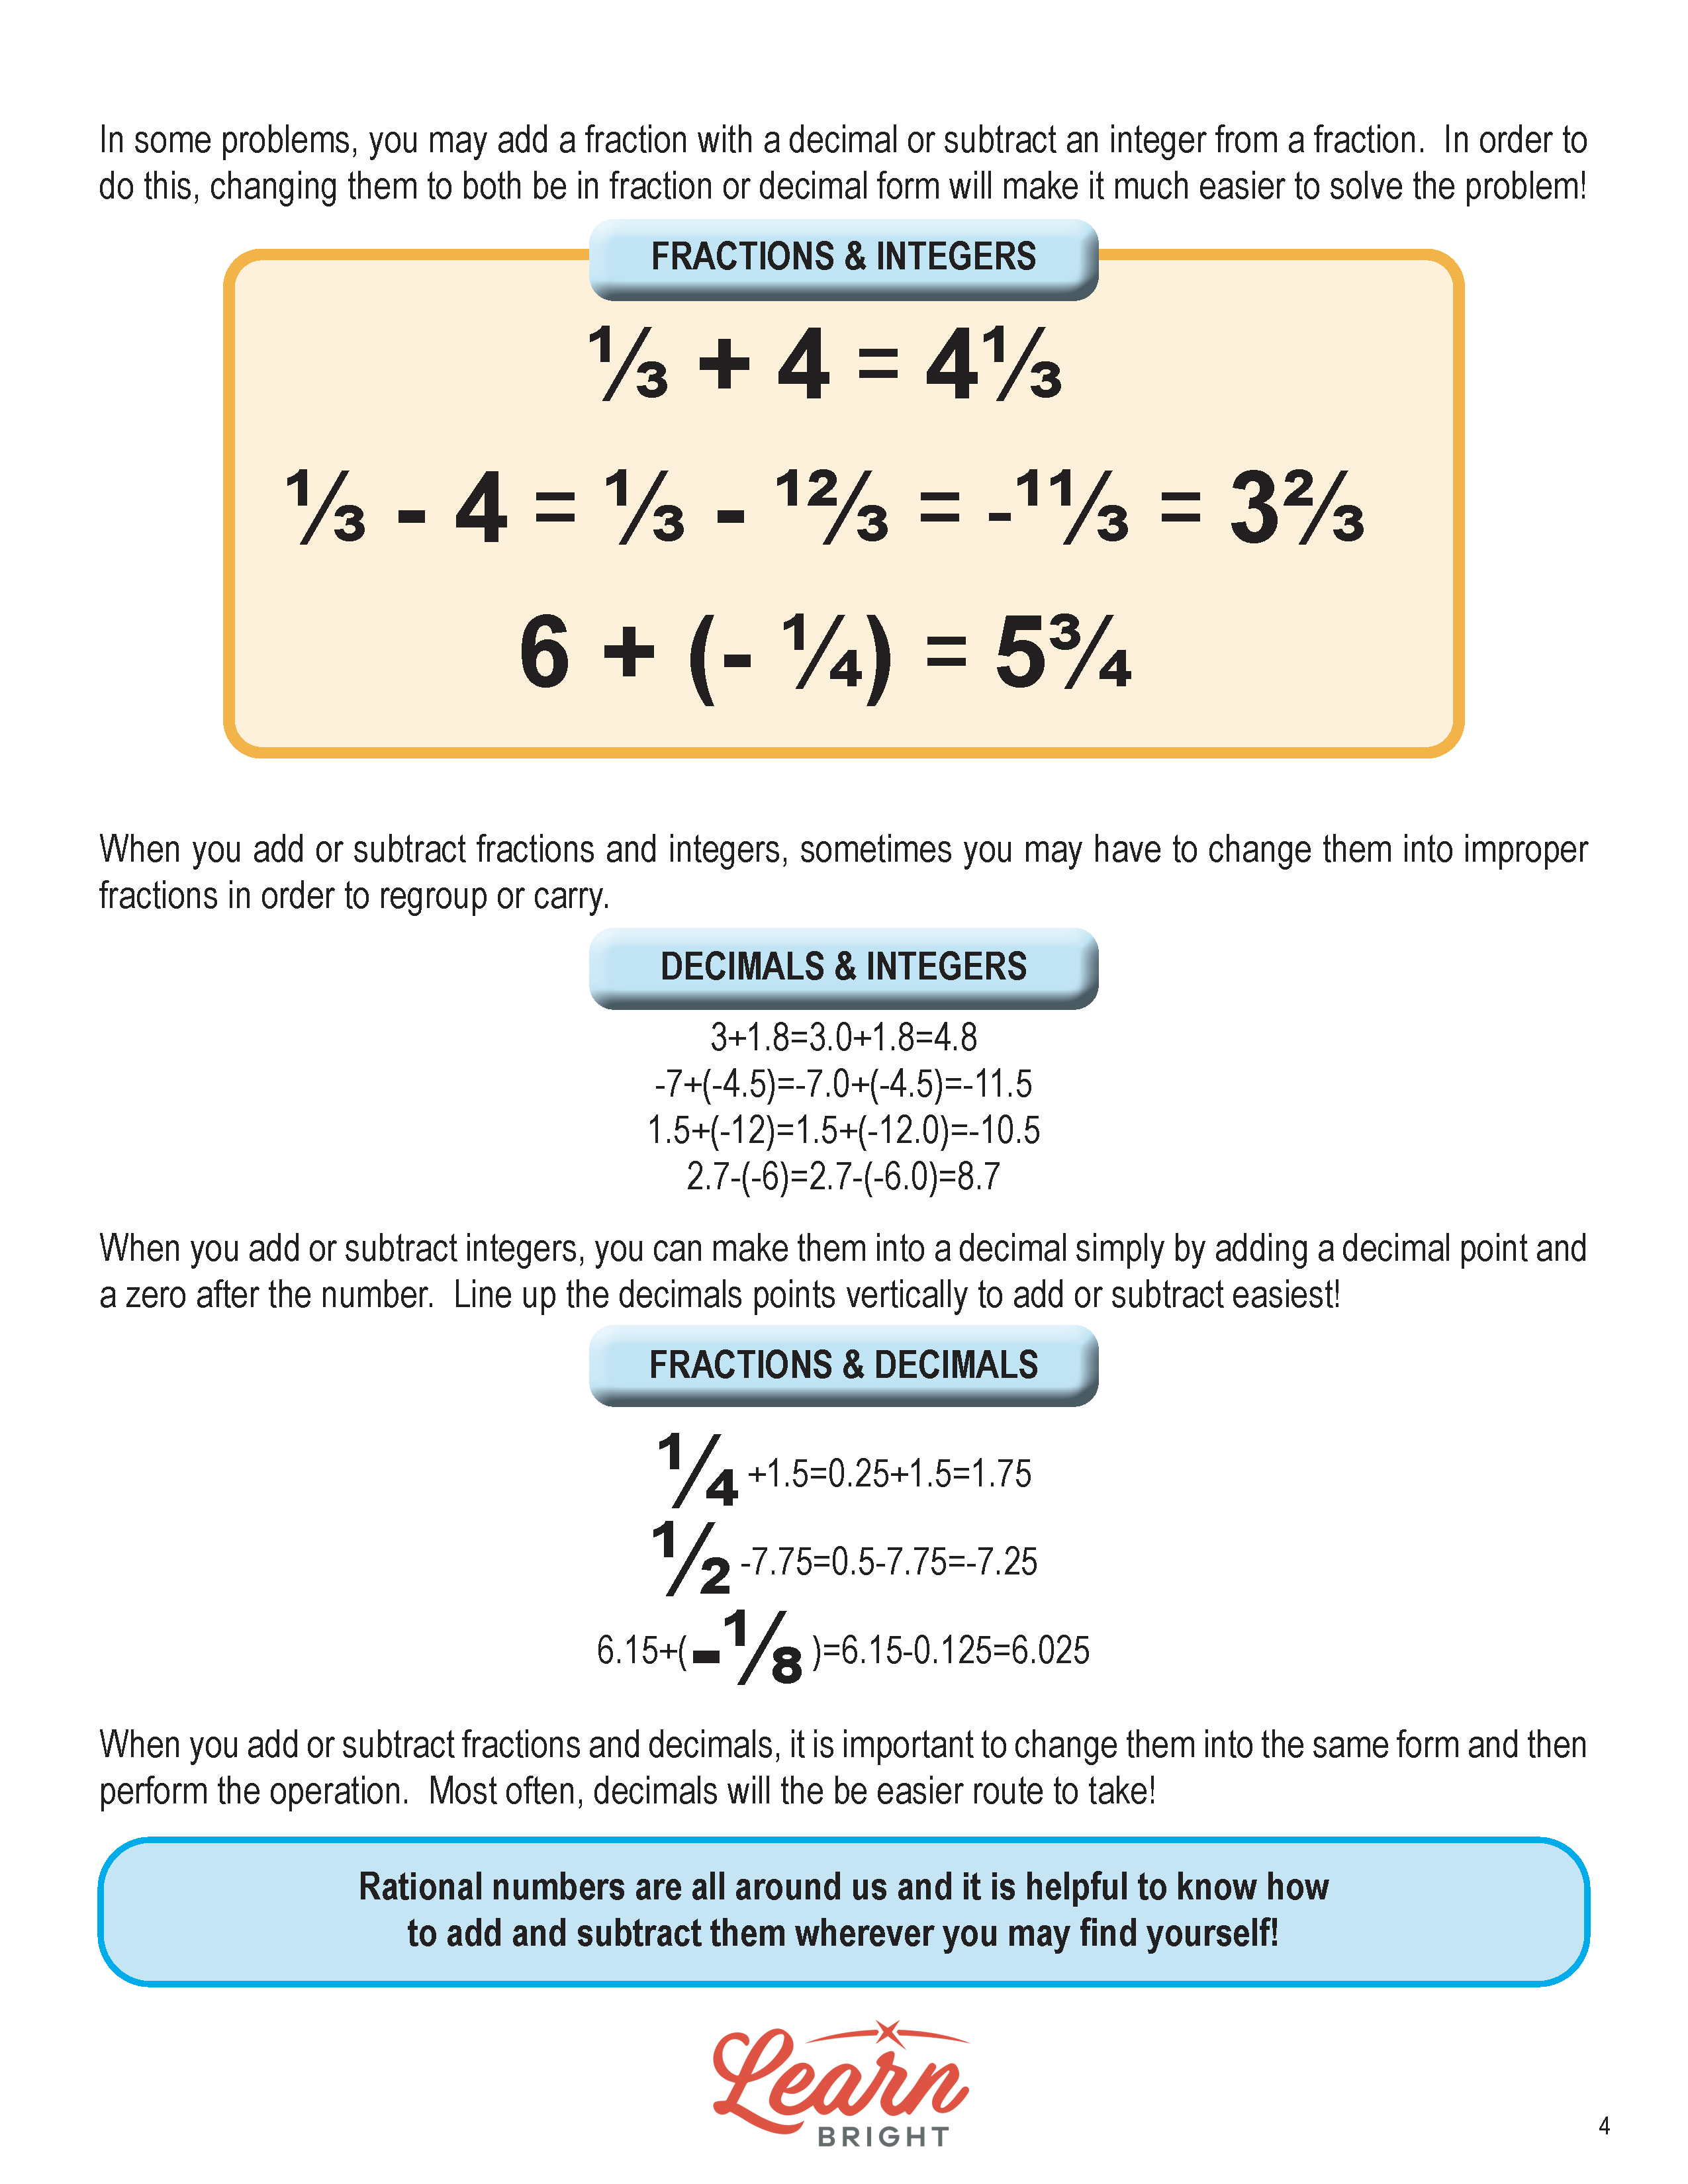 adding-and-subtracting-rational-numbers-worksheet-download